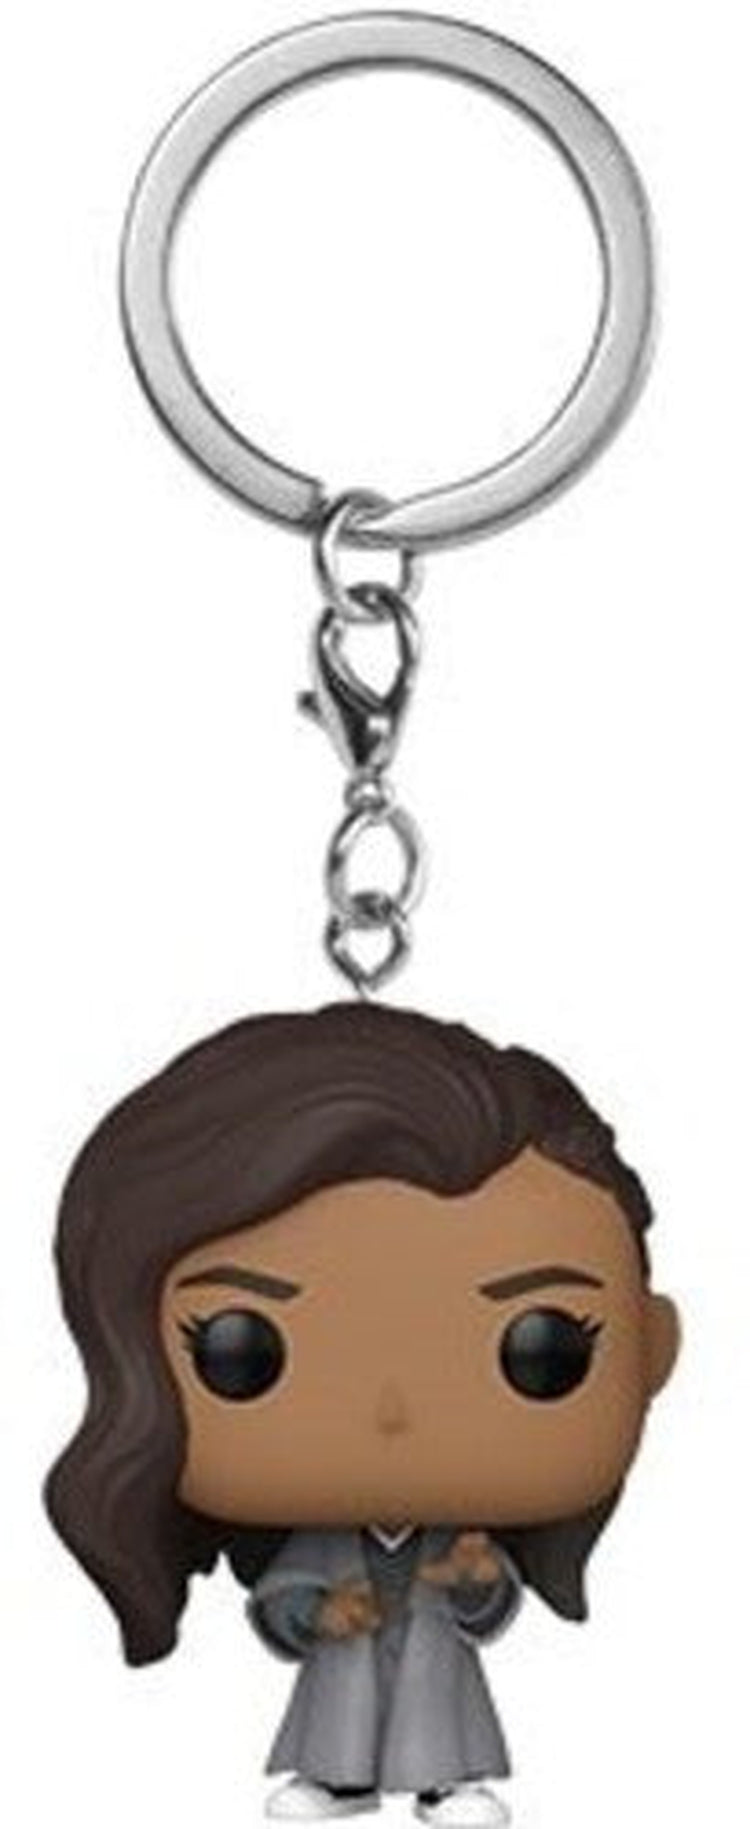 FUNKO POP! KEYCHAIN: Doctor Strange in the Multiverse of Madness - America Chavez